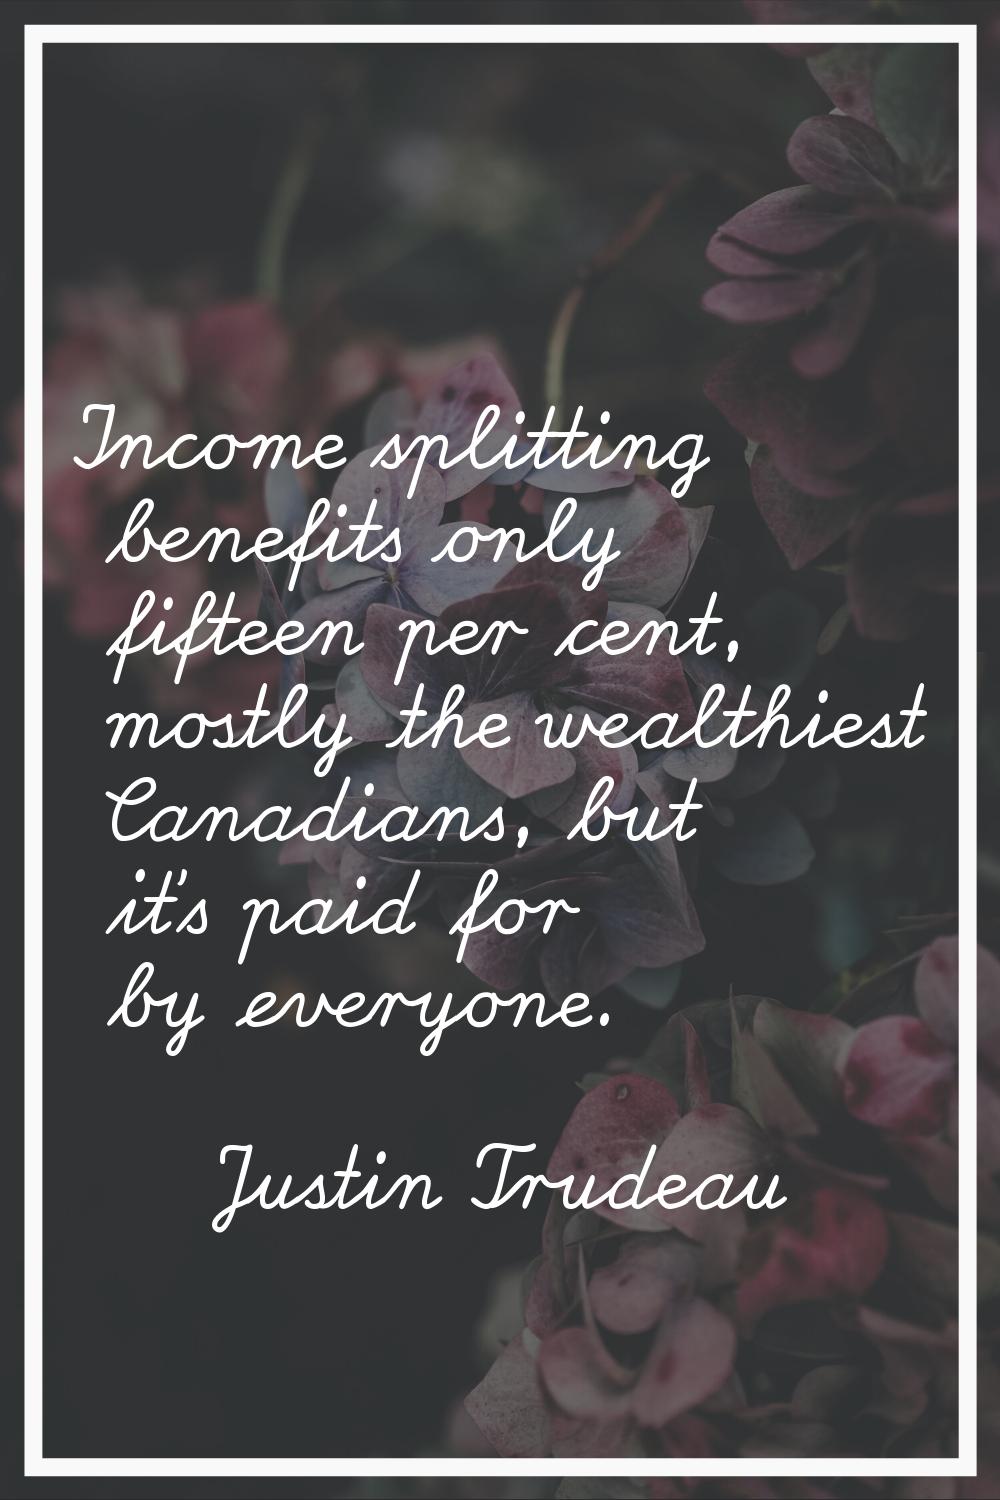 Income splitting benefits only fifteen per cent, mostly the wealthiest Canadians, but it's paid for